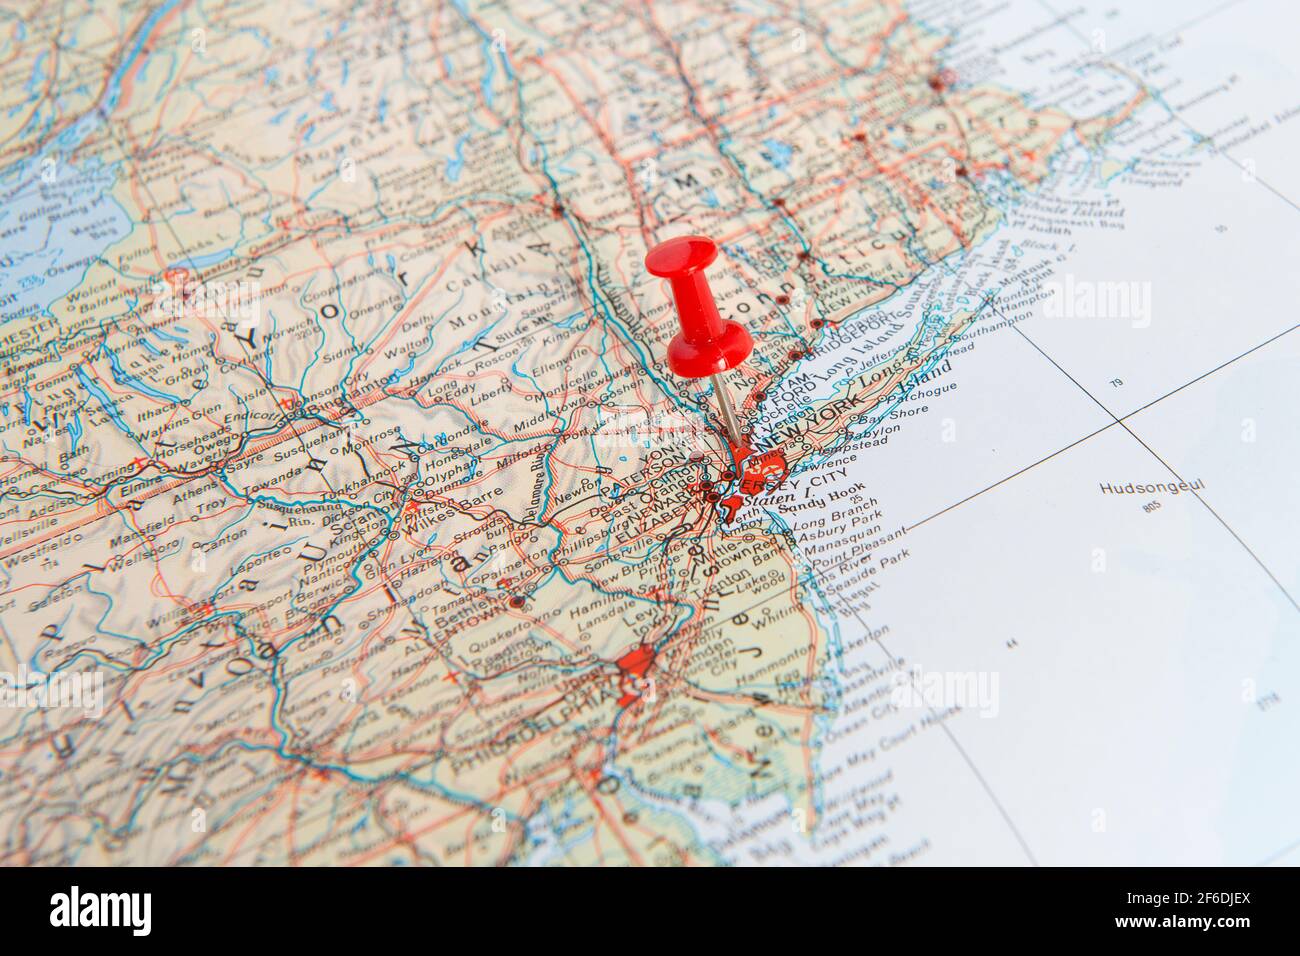 Red pin in a map of the United States pointing out New York as a concept for a desitnation one wishes to go to or has visted already Stock Photo